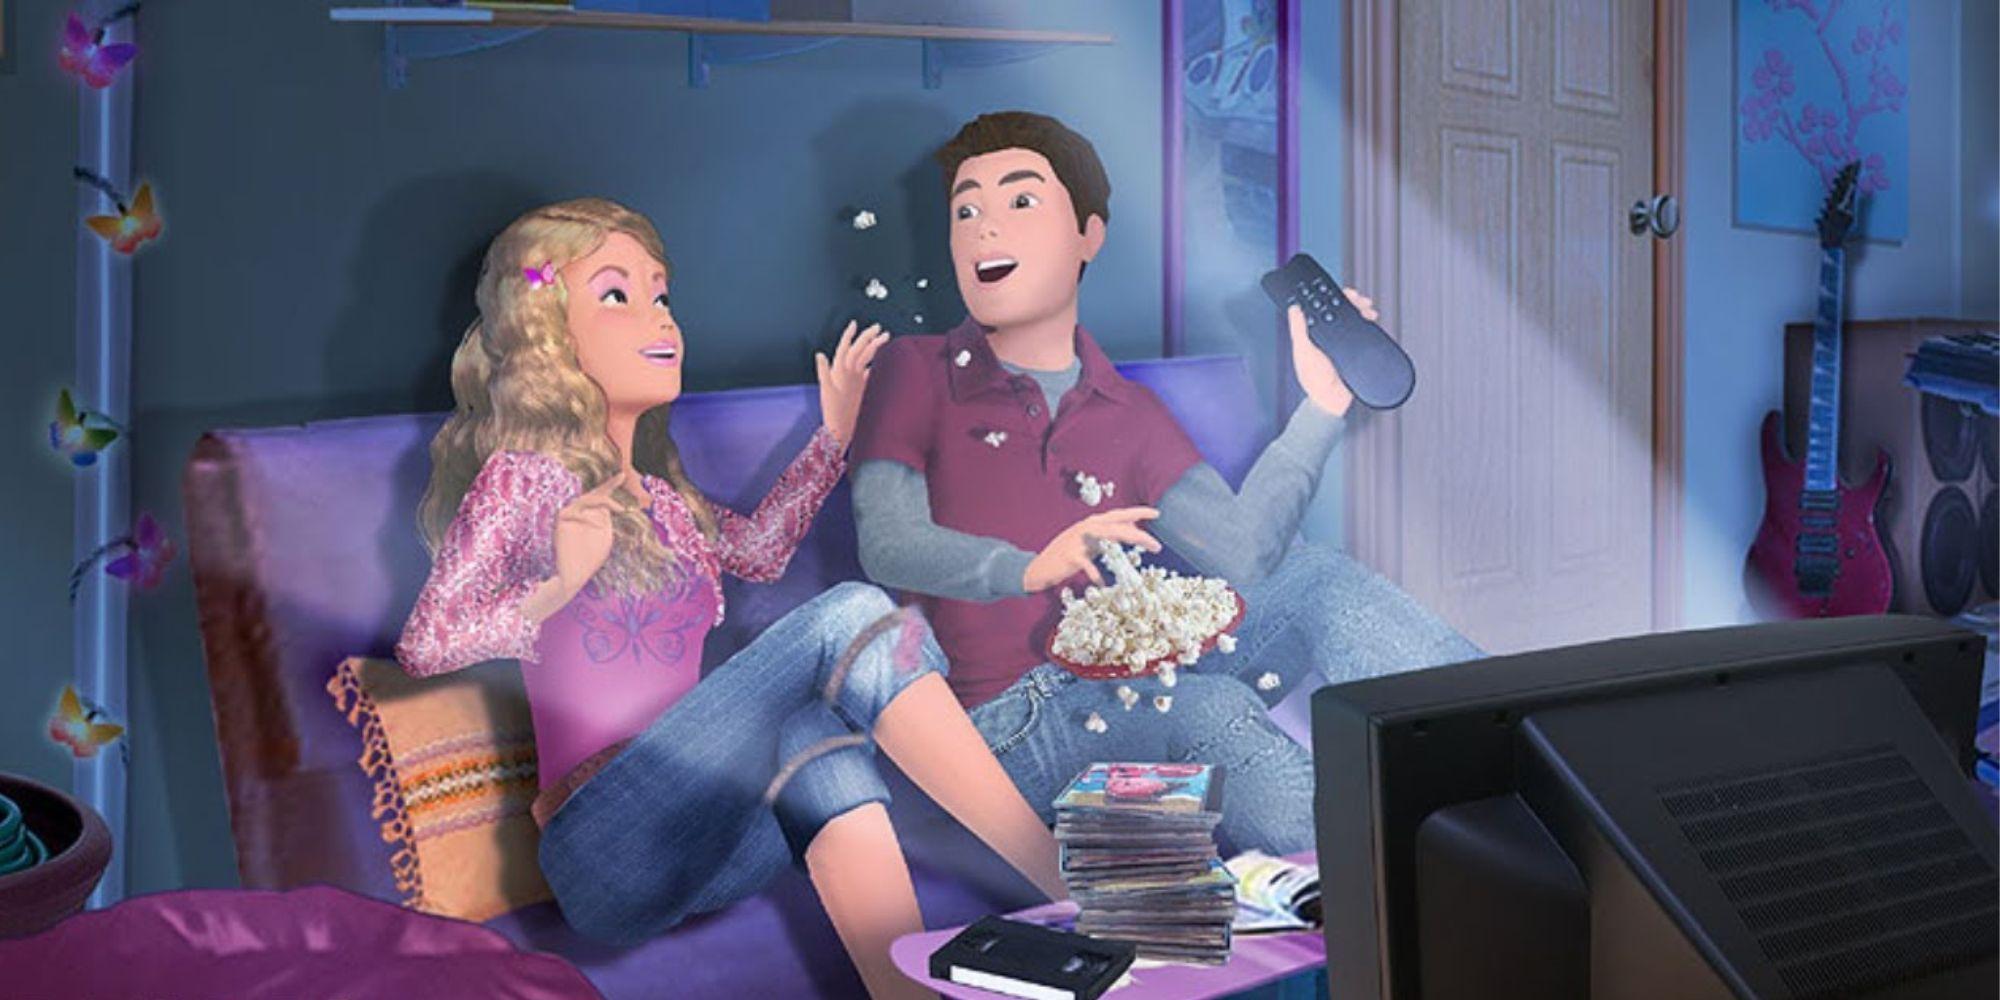 Barbie and Kevin eating popcorn during movie night in The Barbie Diaries